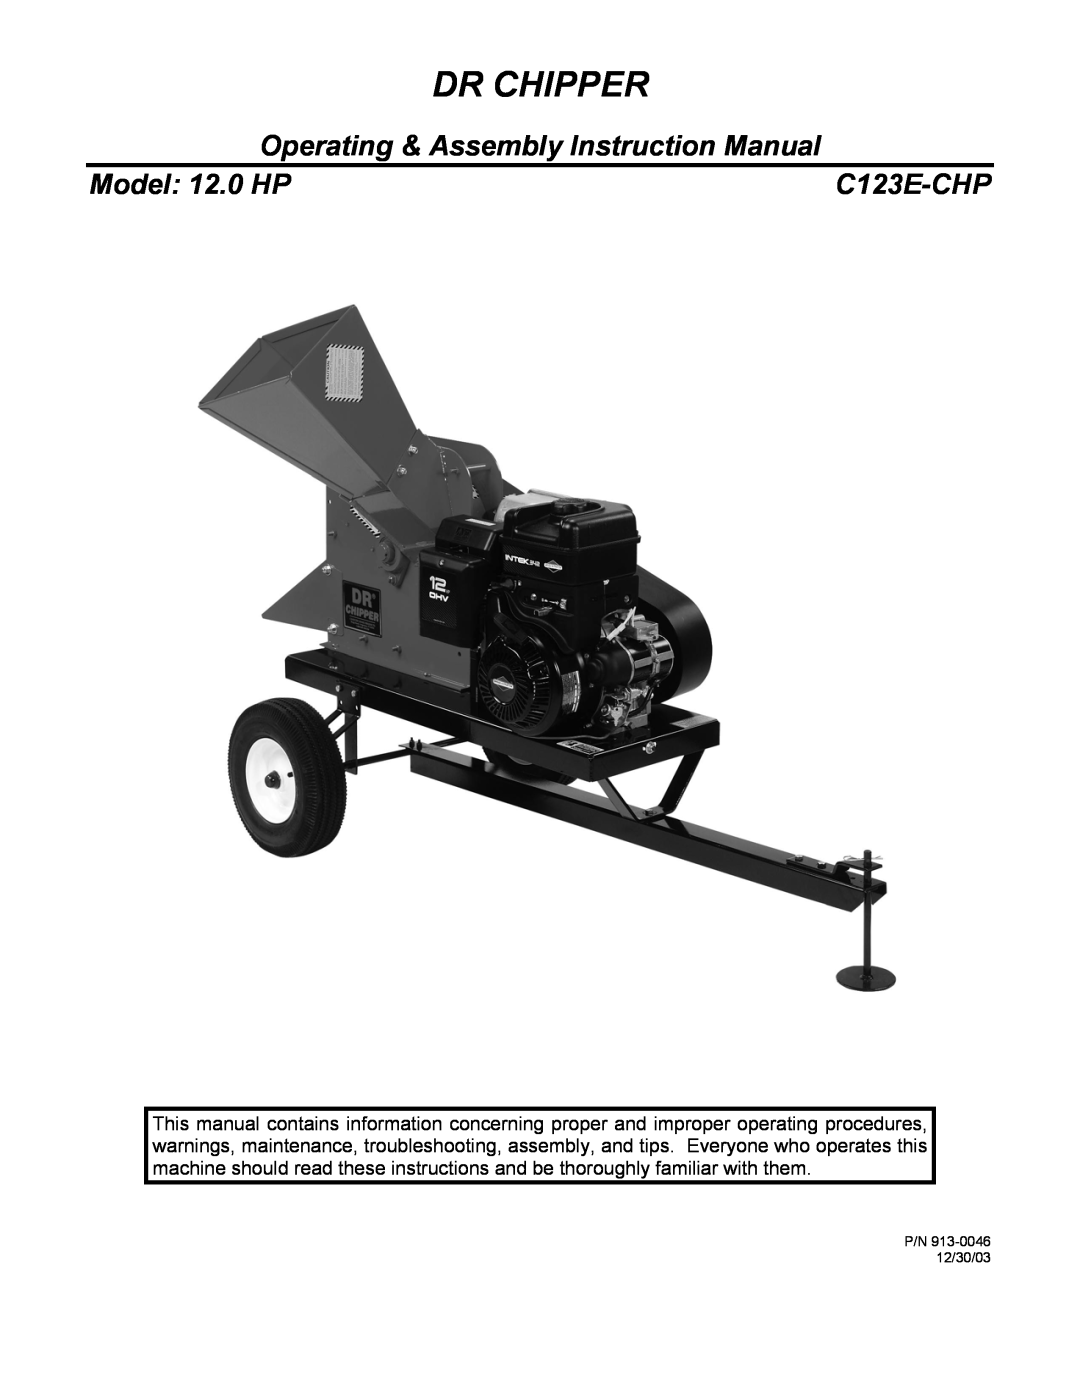 Country Home Products C123E-CHP instruction manual Dr Chipper, Operating & Assembly Instruction Manual, Model: 12.0 HP 